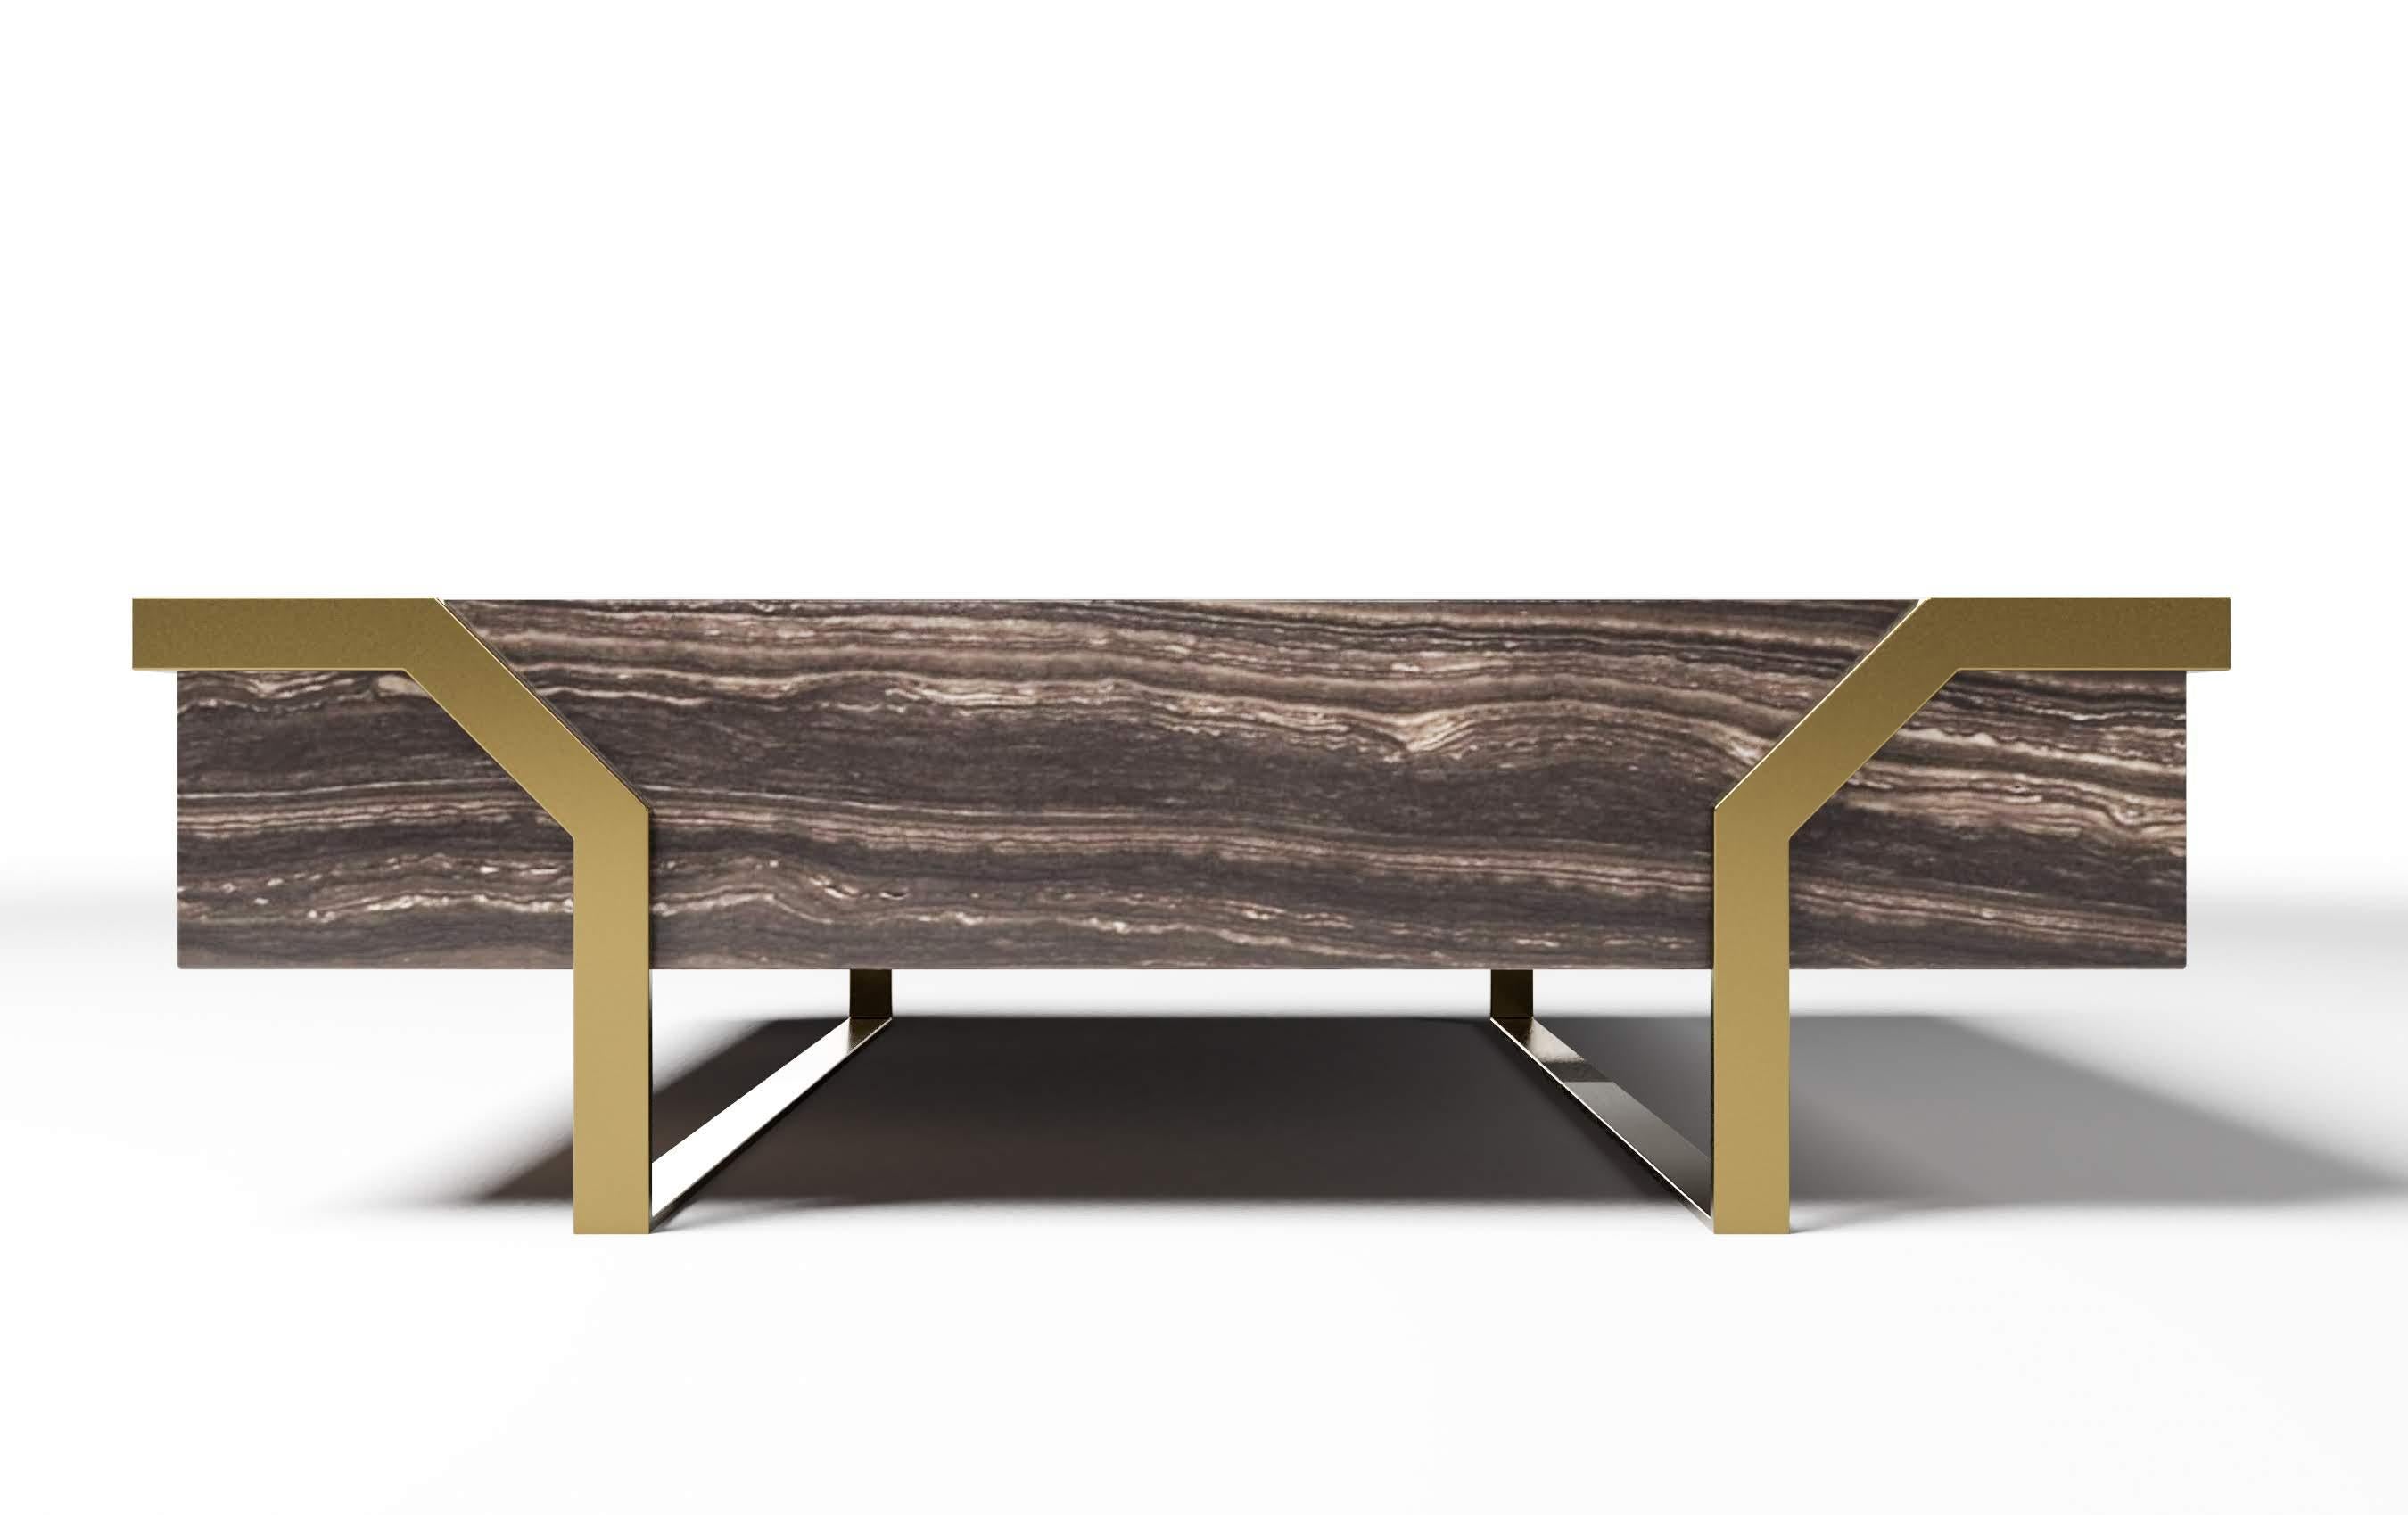 The Hermosa coffee table is of generous size with unique symmetrical metallic legs. It is offered in a variety of woods, marbles and lacquered tops. It is part of Susan Hornbeak's Ortiz Milano brand and is handcrafted in Italy with precision and